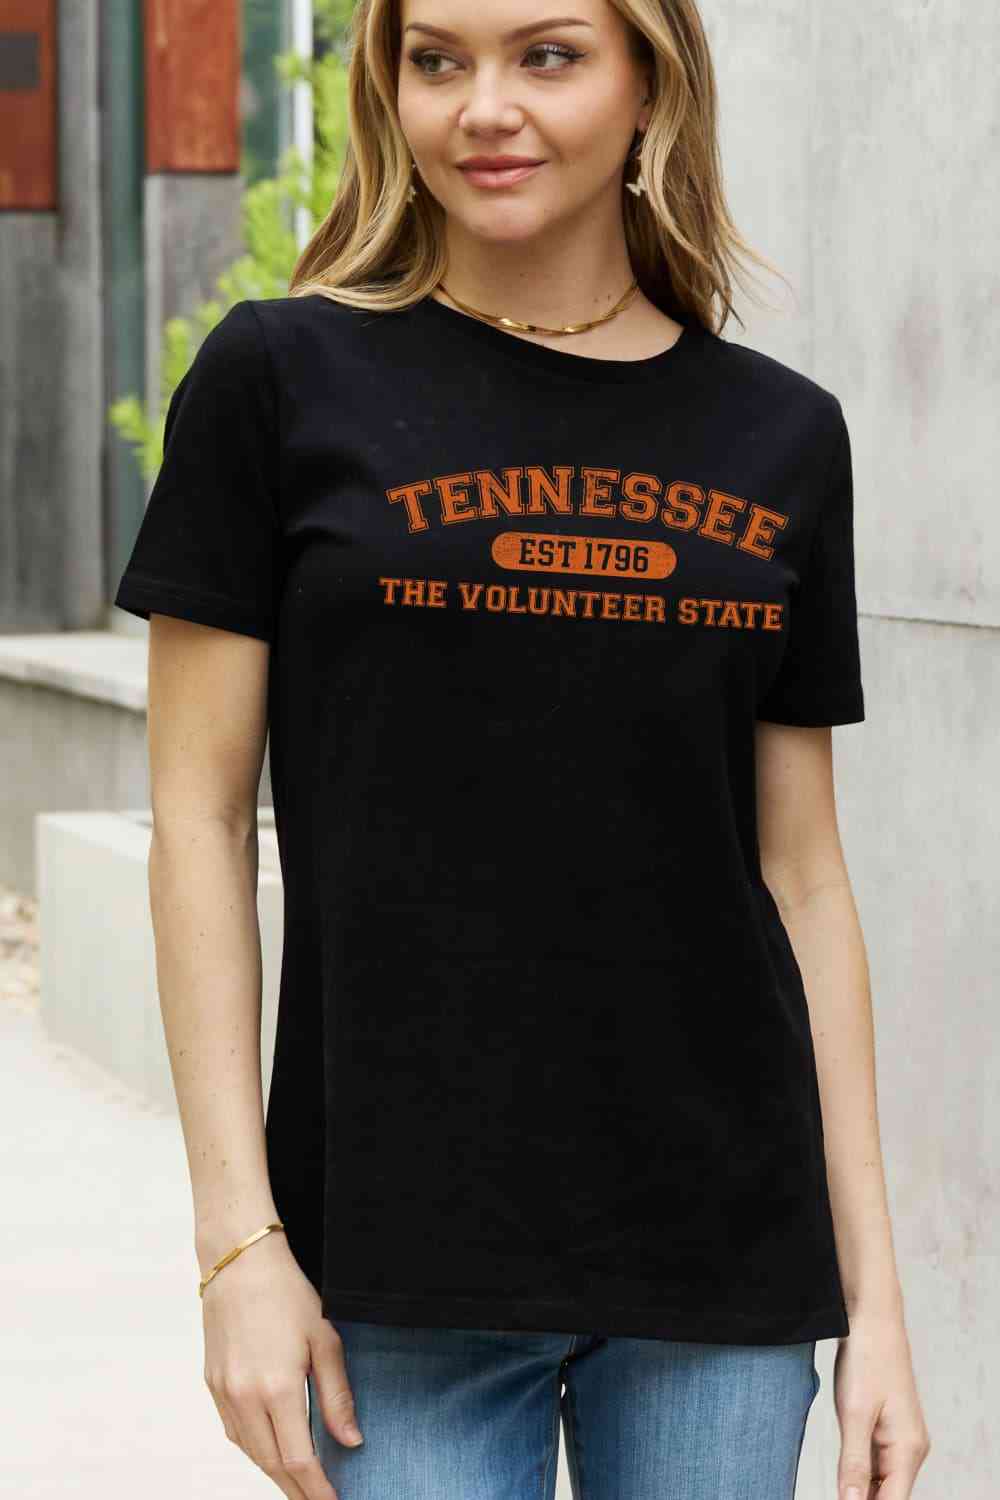 TENNESSEE EST 1796 THE VOLUNTEER STATE Graphic Cotton Tee - Kawaii Stop - 1796 Graphic, Casual Style, Comfortable Fit, Cotton Shirt, Fashionable Comfort, Graphic Tee, Hand Wash Only, Long Length, Premium Quality, Round Neck, Ship From Overseas, Short Sleeves, Show Your Roots, Simply Love, Southern Heritage, T-Shirt, Tennessee Pride, Women's Fashion